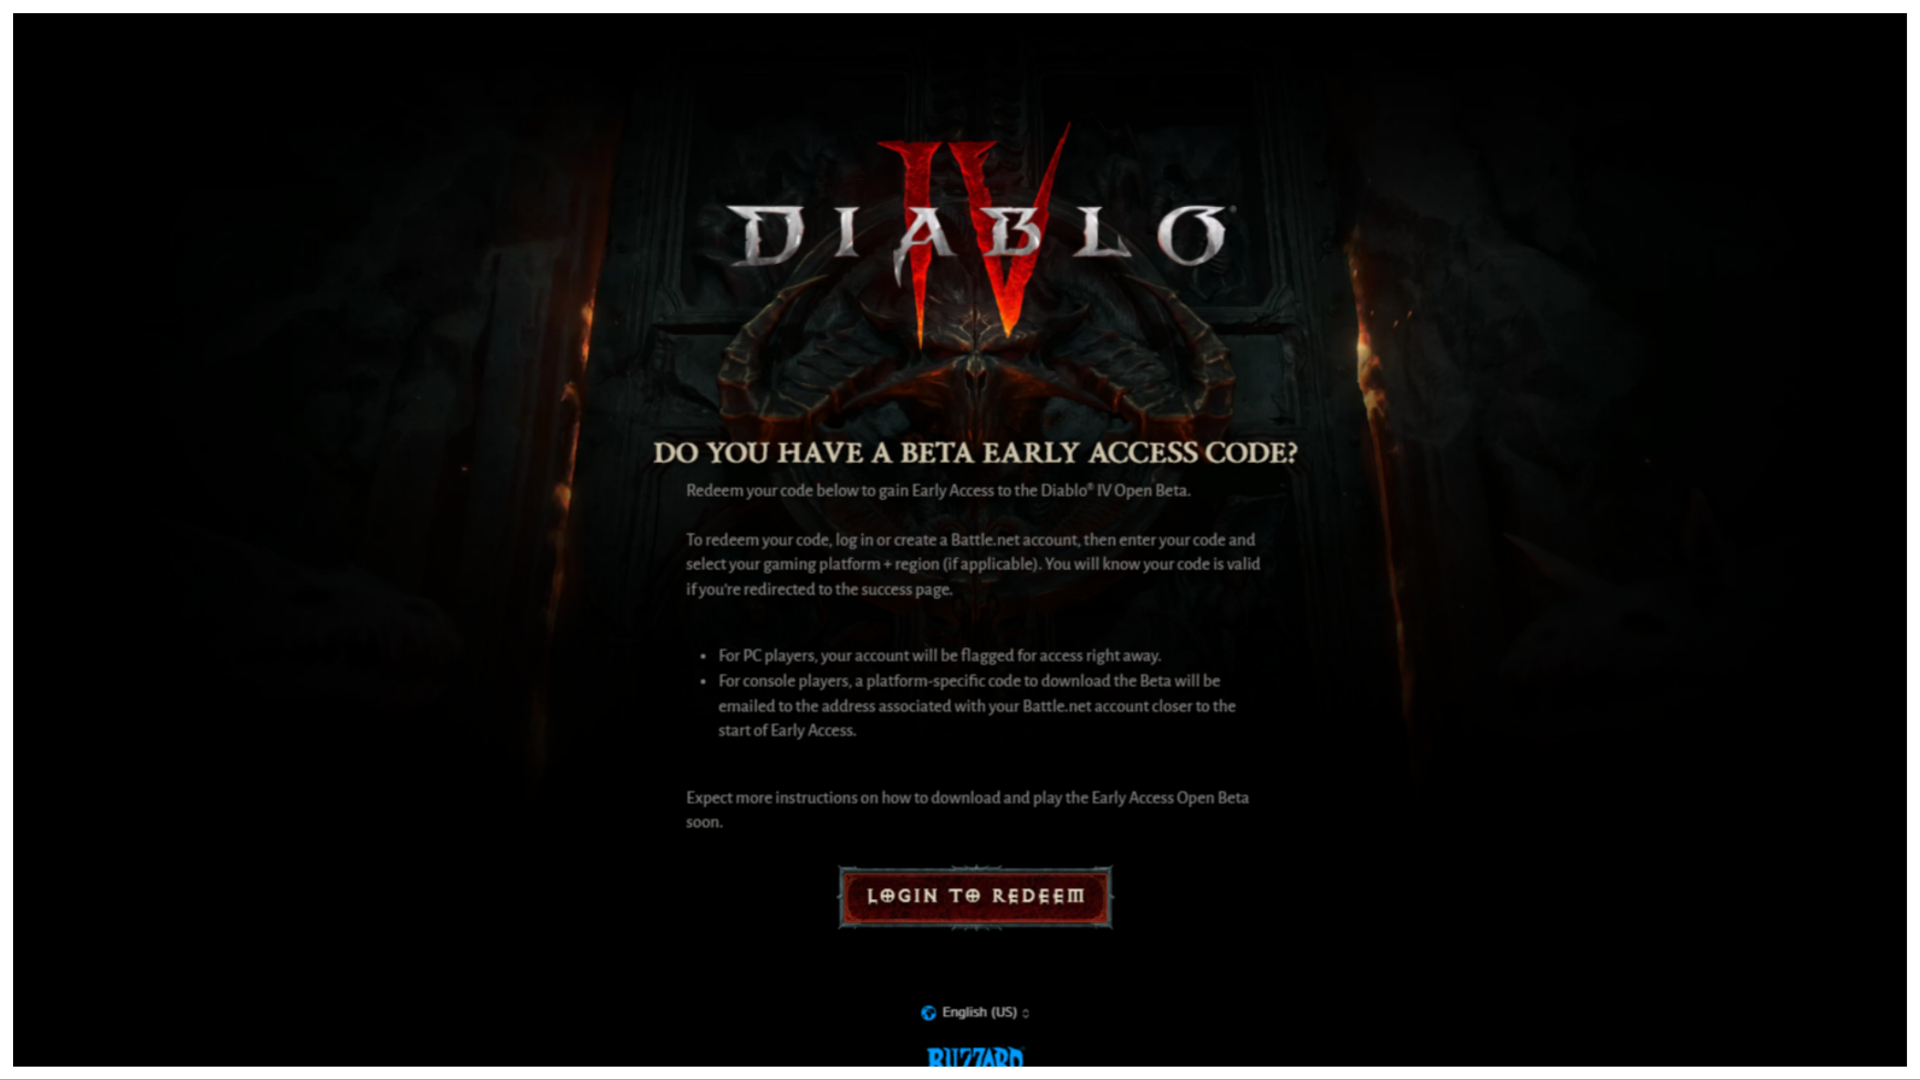 From the Diablo 4 official website